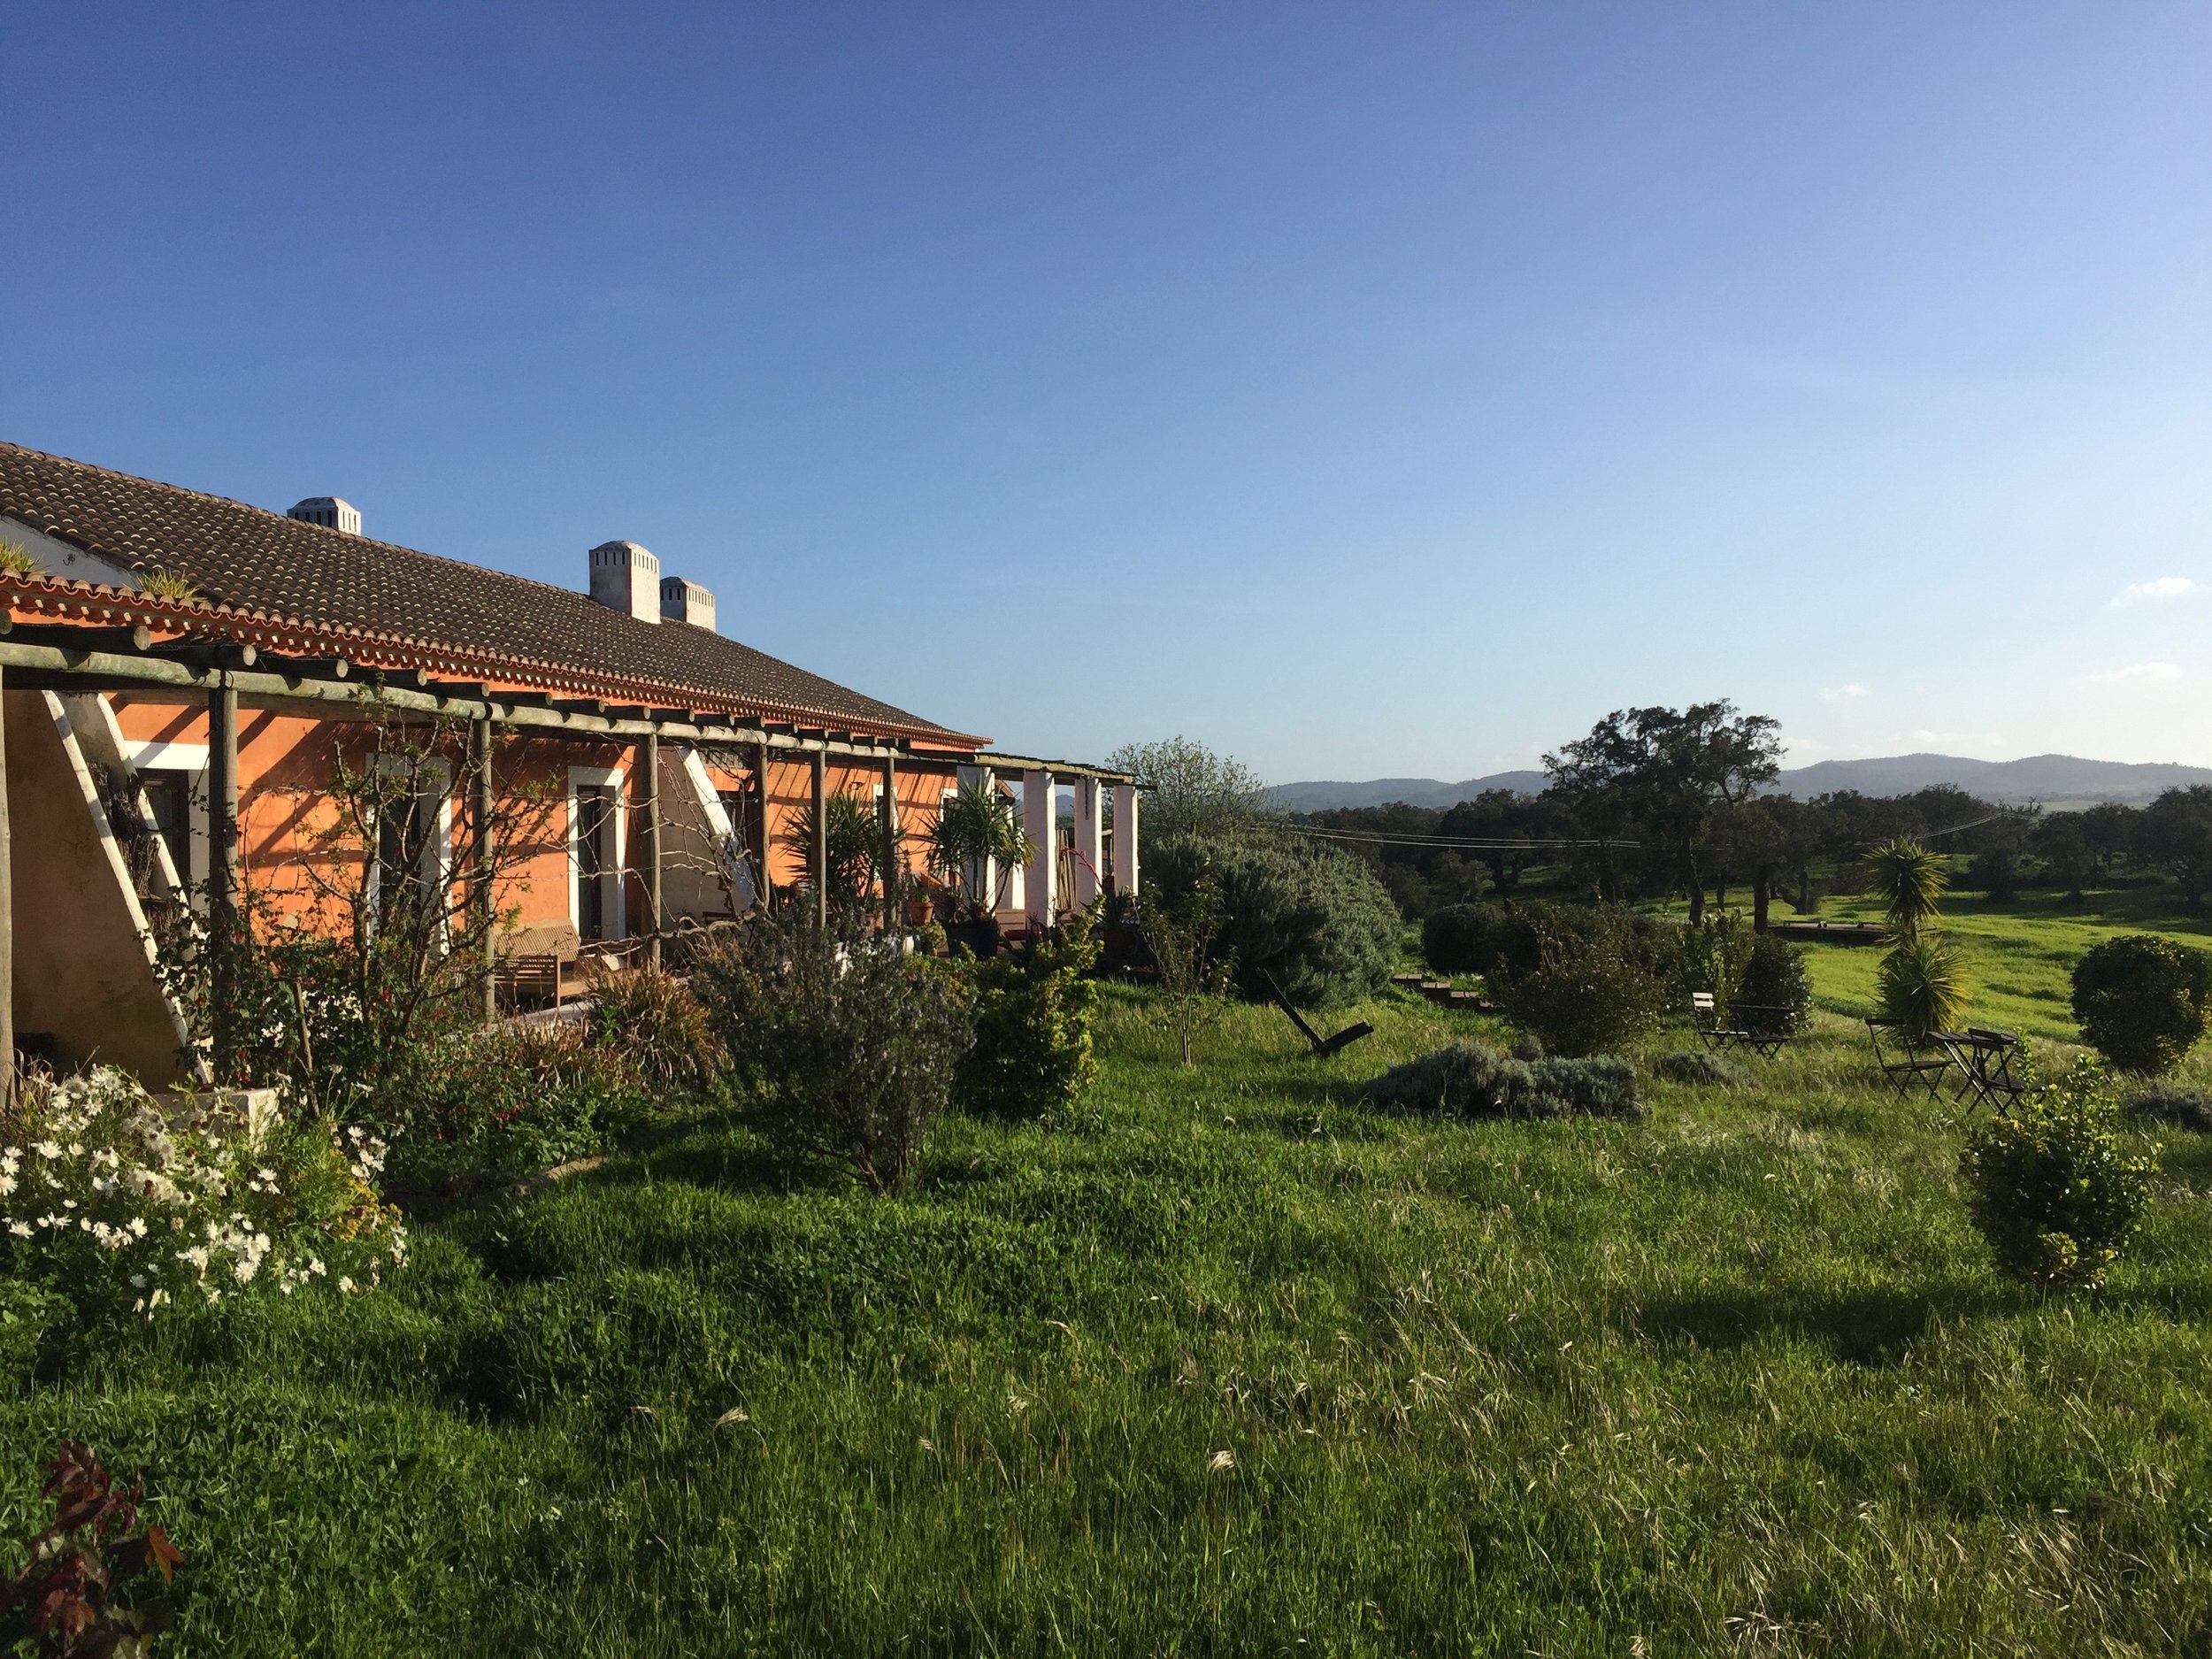 Evening Standard 2018: Herdade do Reguenguinho, the perfect place to stay in Alentejo